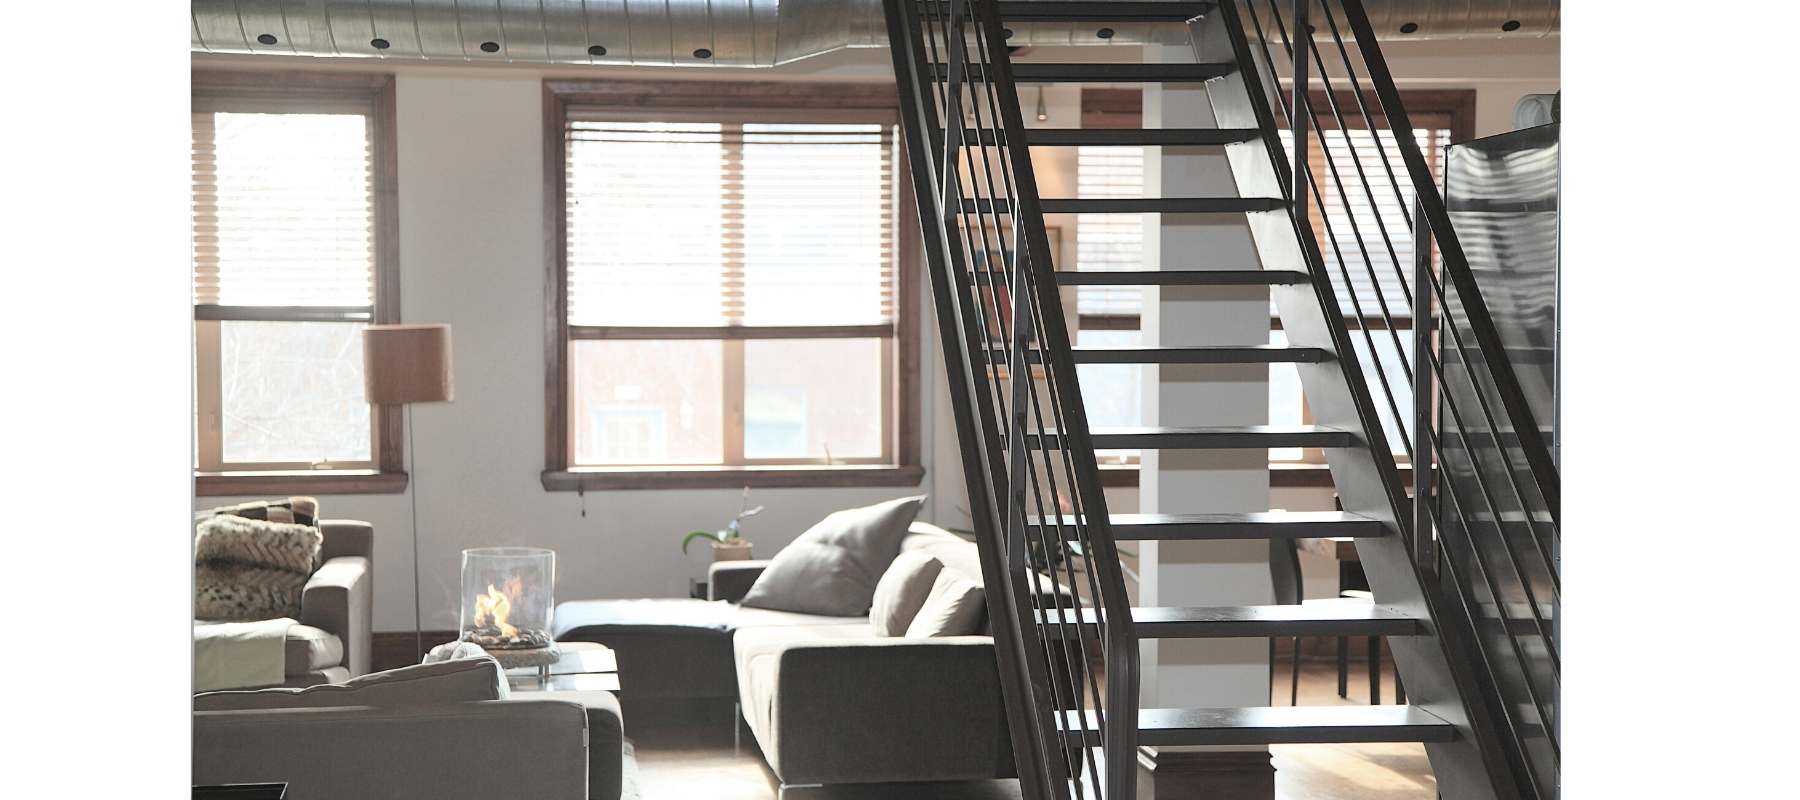 Loft style apartment with metal stairs and large windows